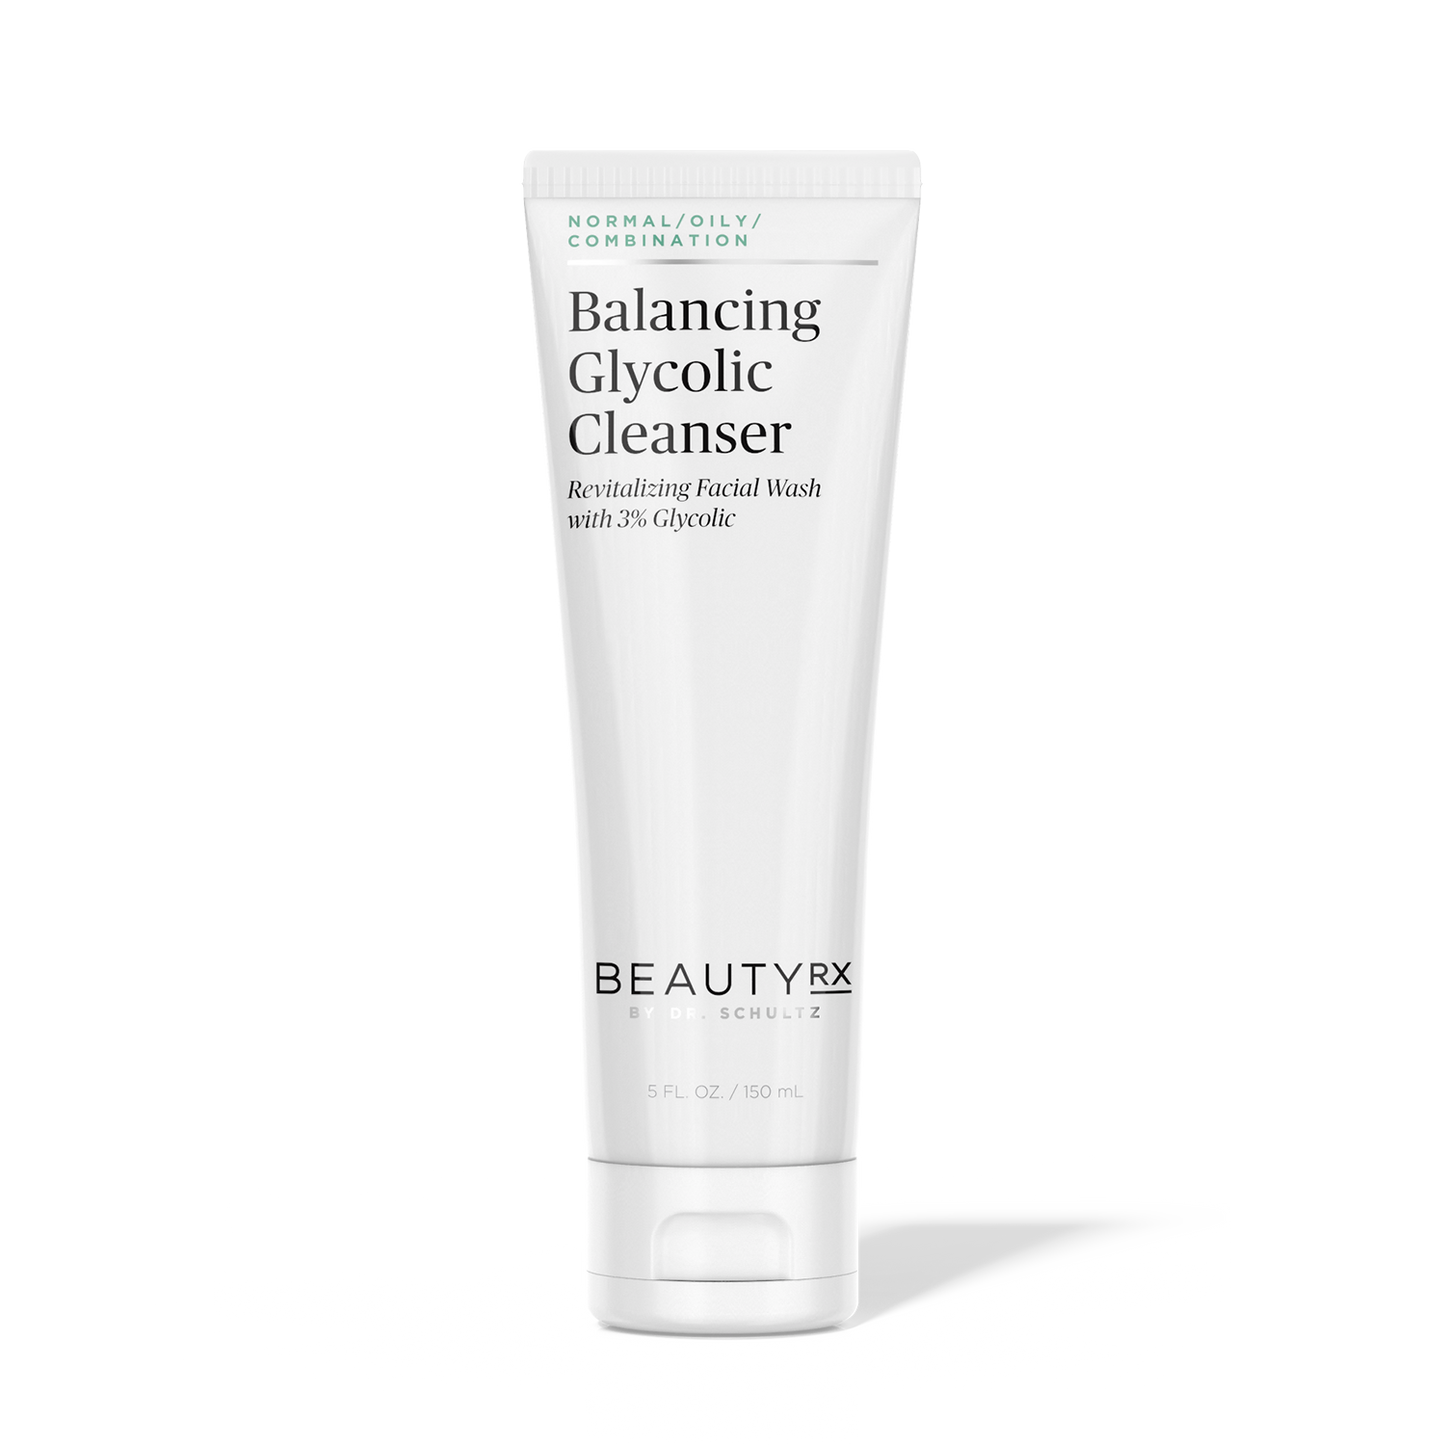 Balancing Glycolic Cleanser